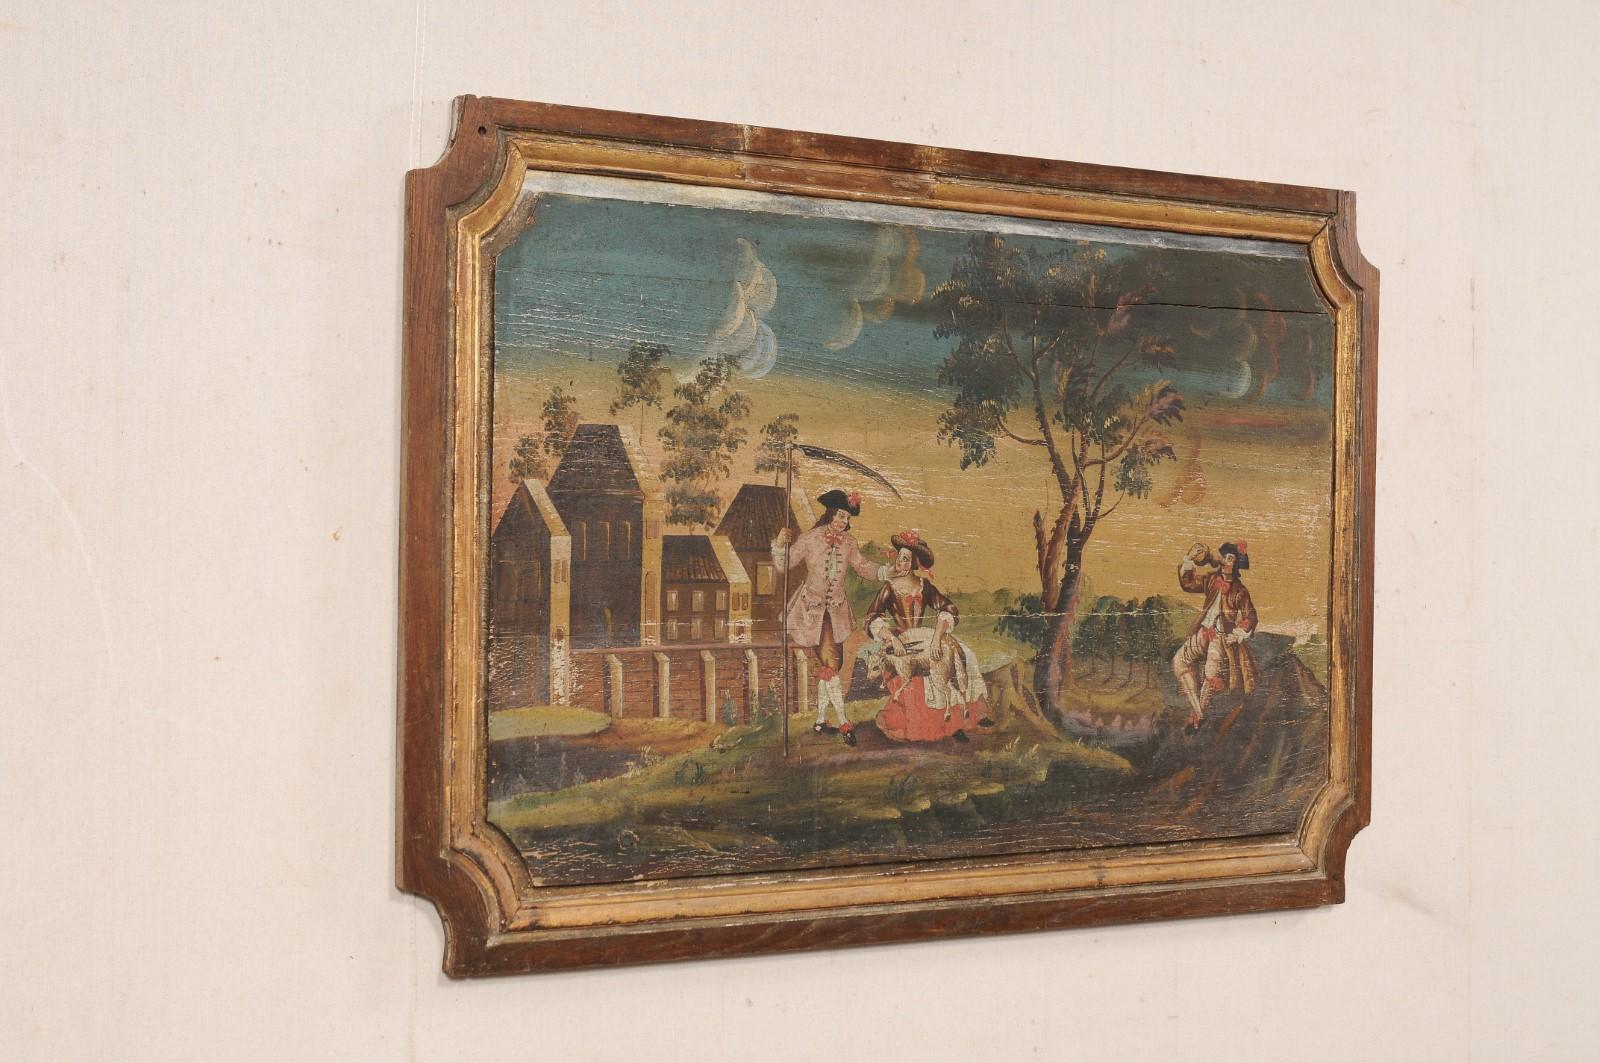 19th C. French Landscape & Figures Painting on Wooden Plaque (4+ Ft Wide) For Sale 1